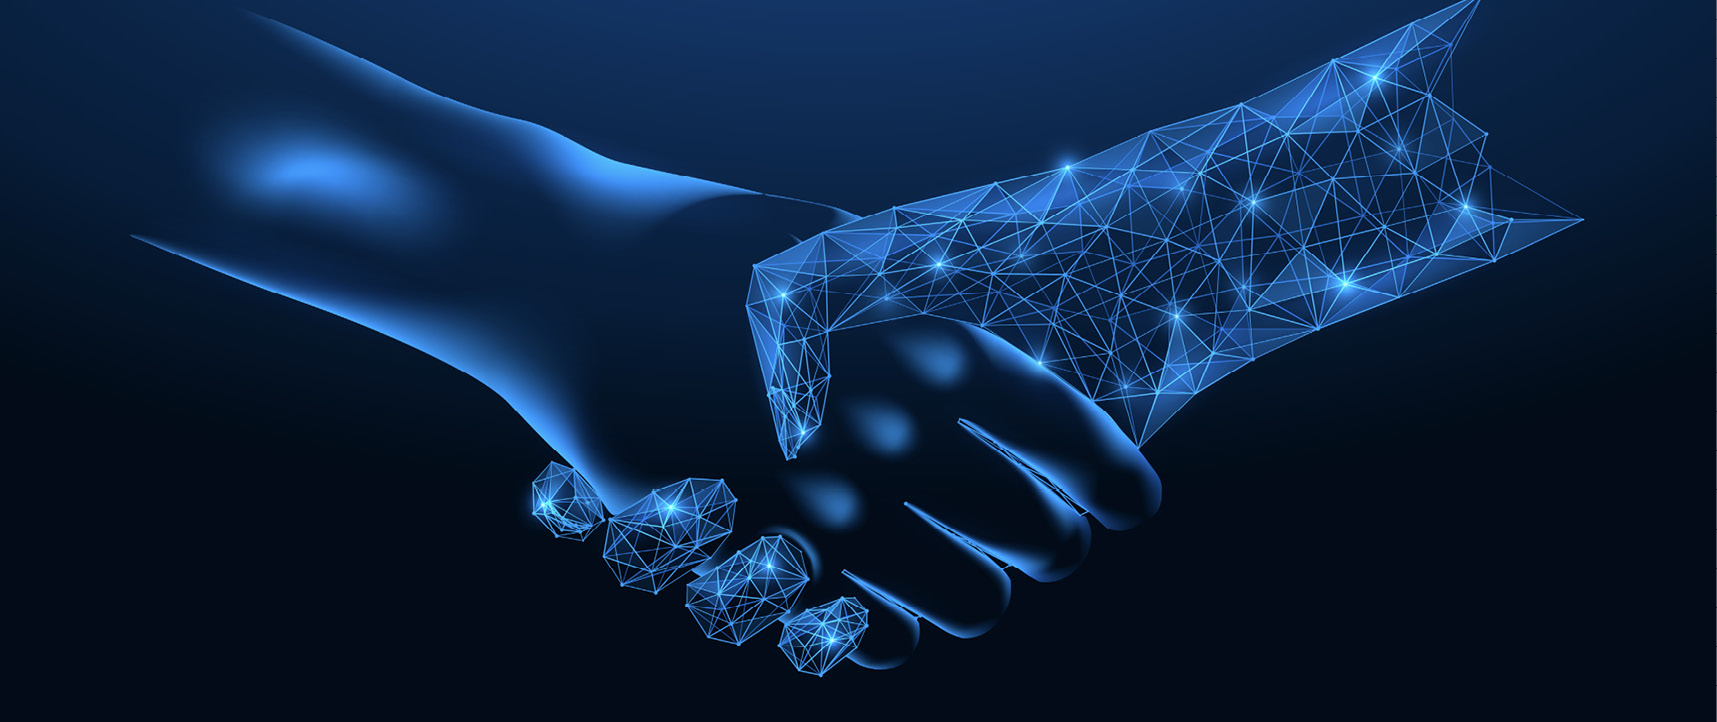 Illustration of a human and low-poly handshake